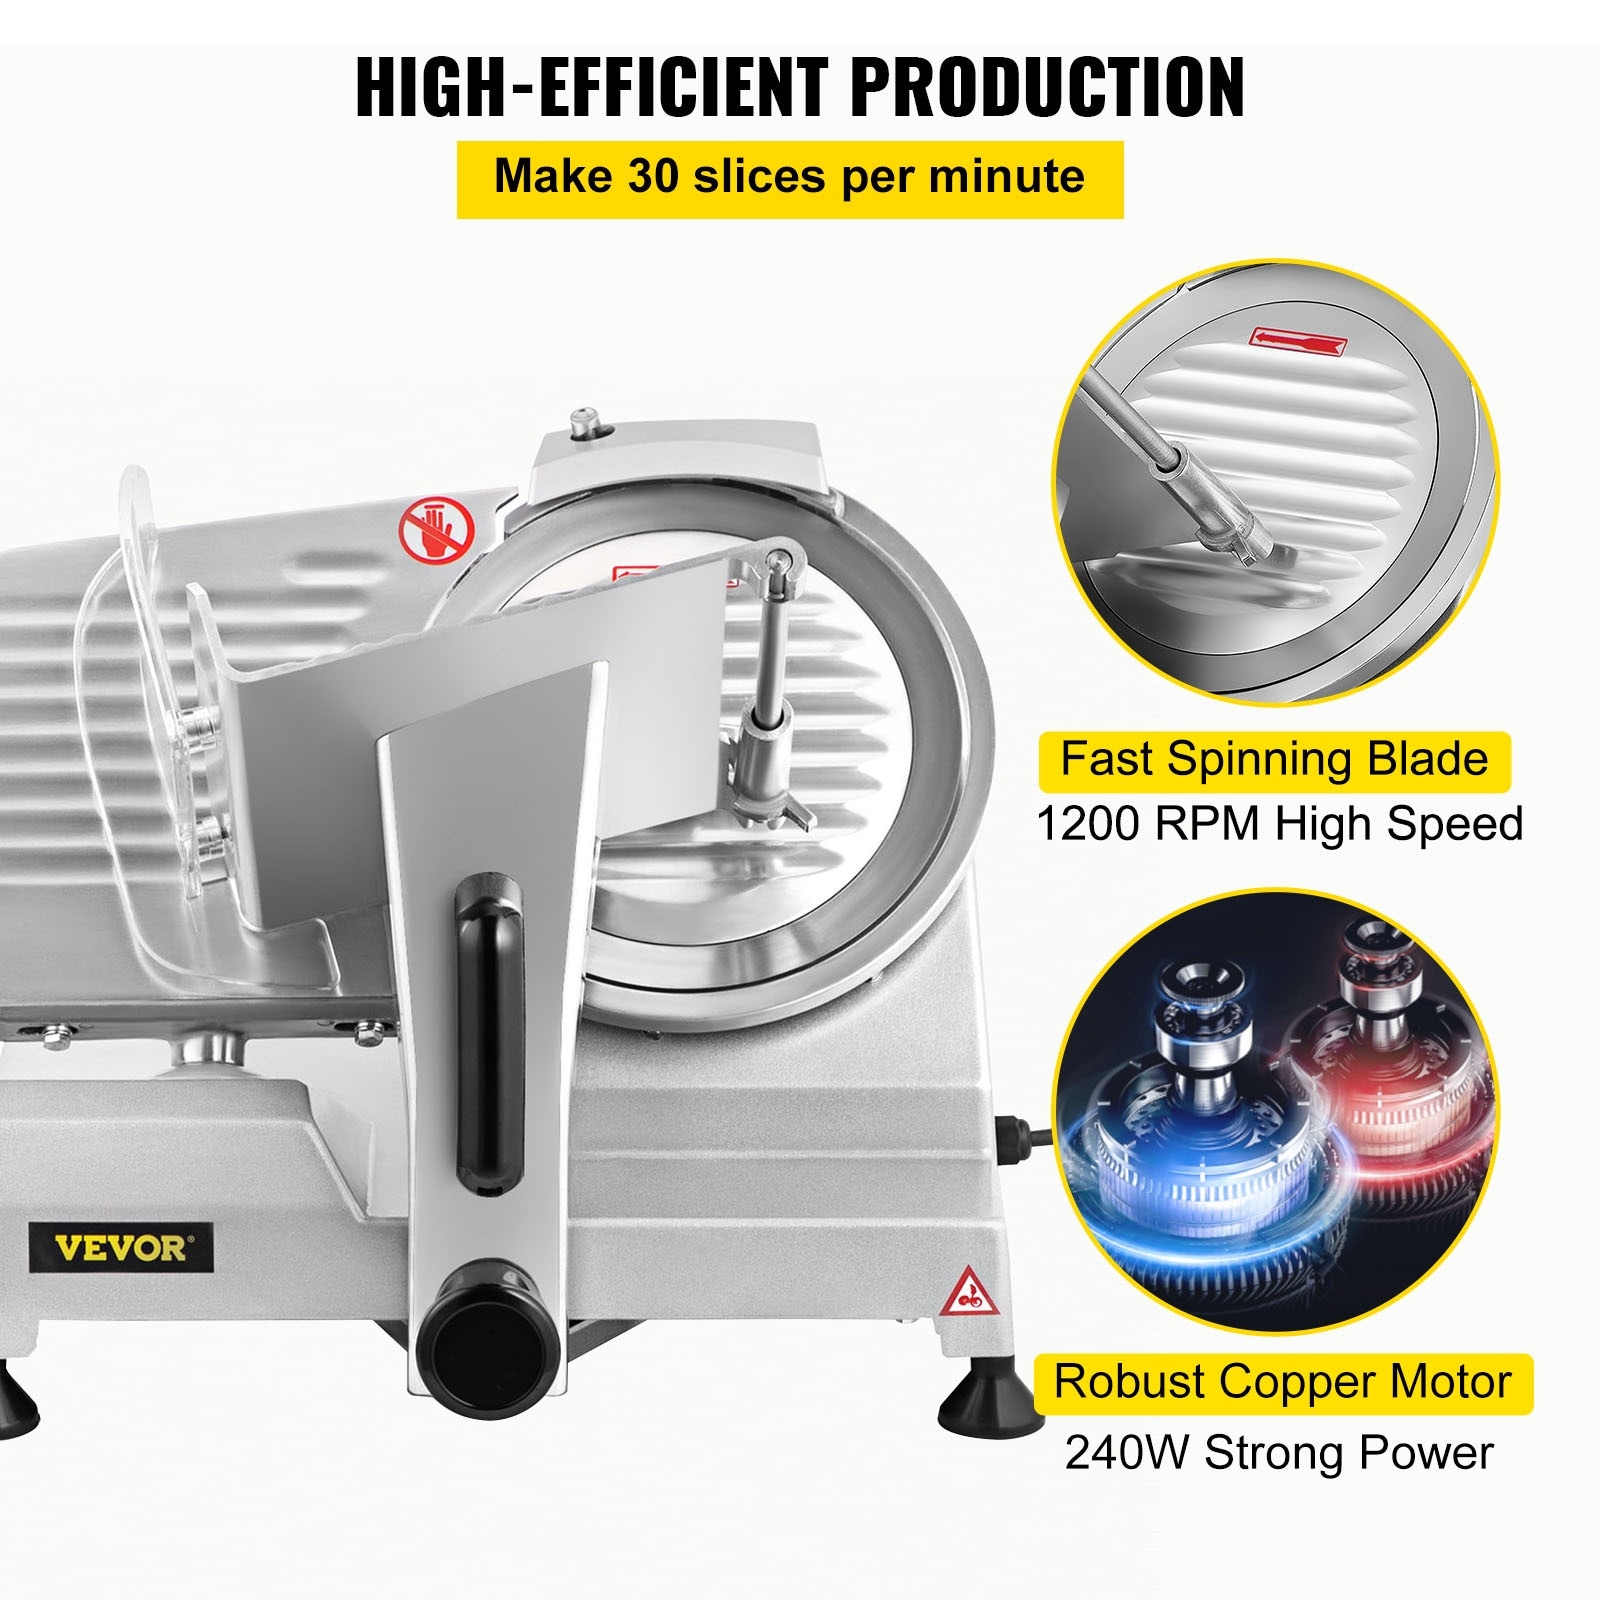 https://ak1.ostkcdn.com/images/products/is/images/direct/499f7ed0a6a19a739946bd3ad77c5ba413f2909a/VEVOR-Commercial-Meat-Slicer-Electric-Deli-Food-Slicer-1200RPM-Meat-Slicer-with-8%27%27-Chromium-plated-Steel-Blade.jpg